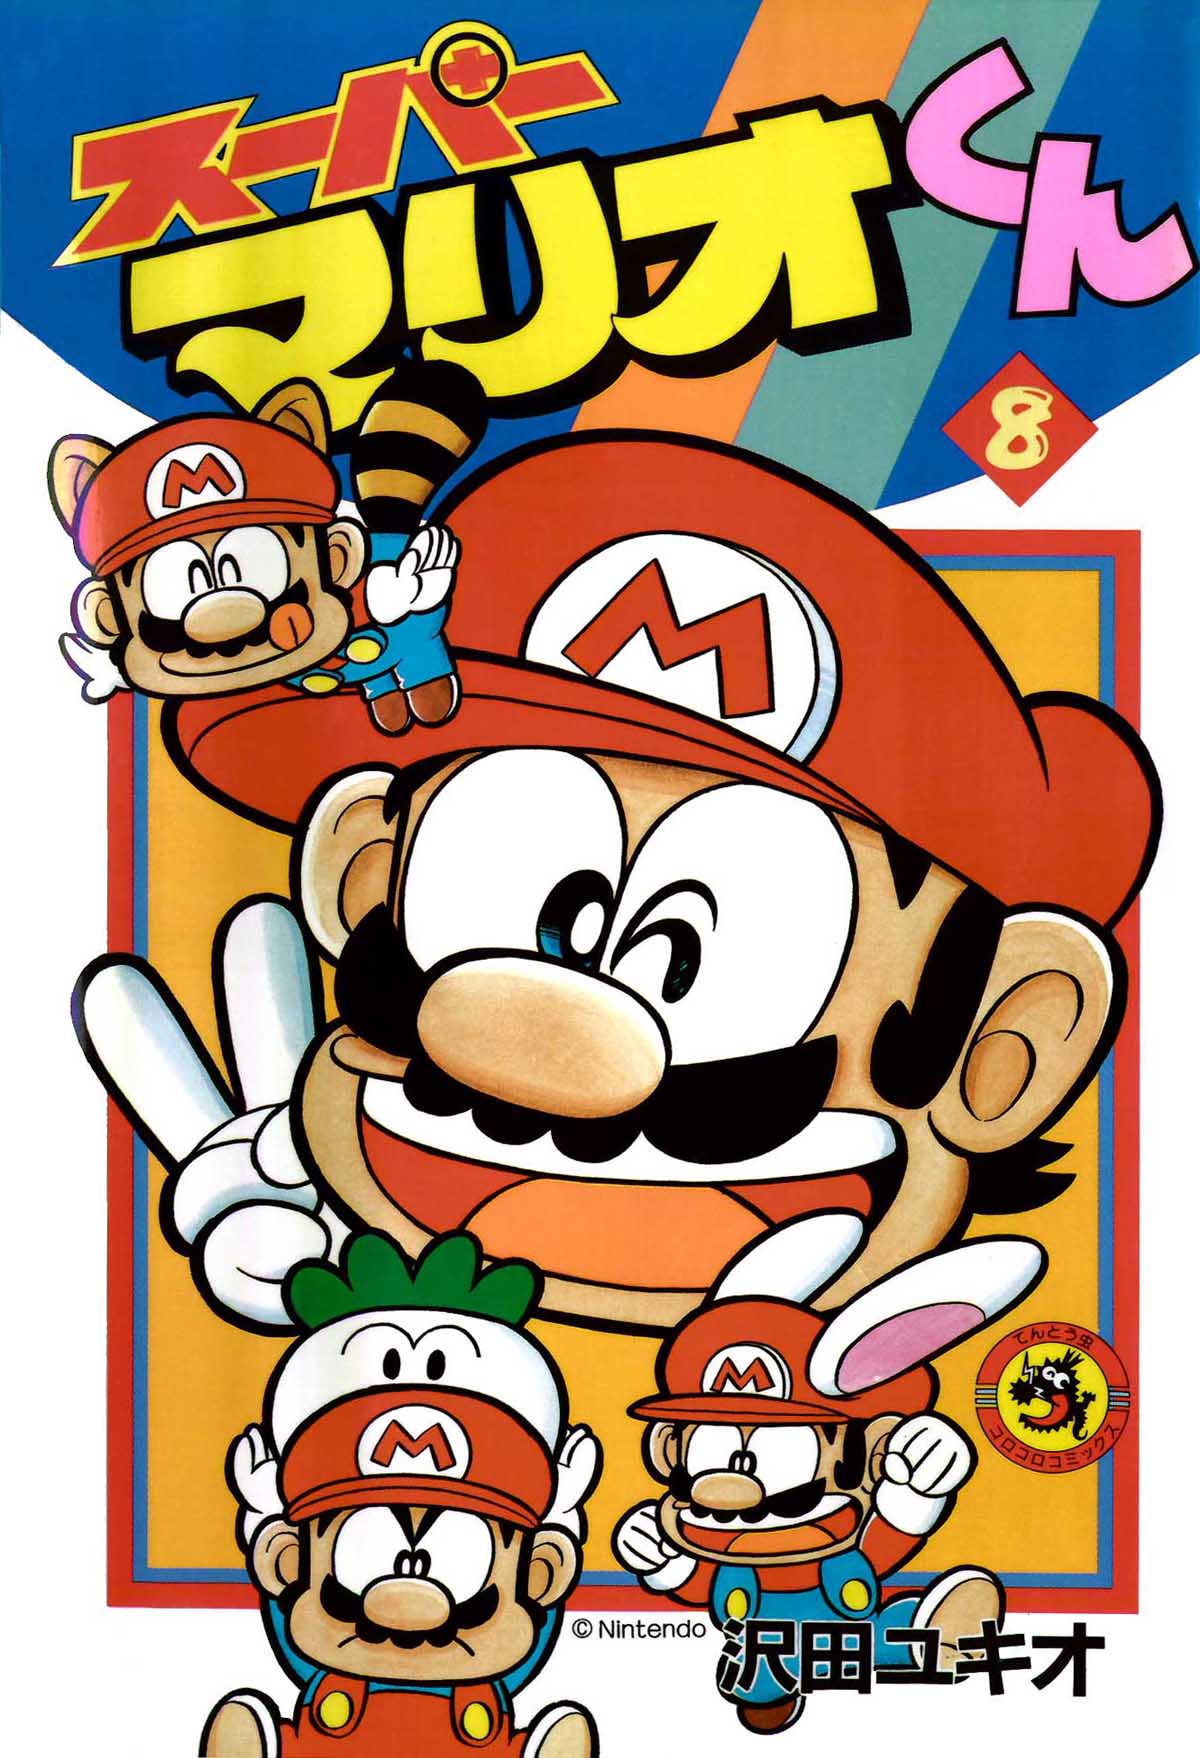 One of the most powerful versions of Mario